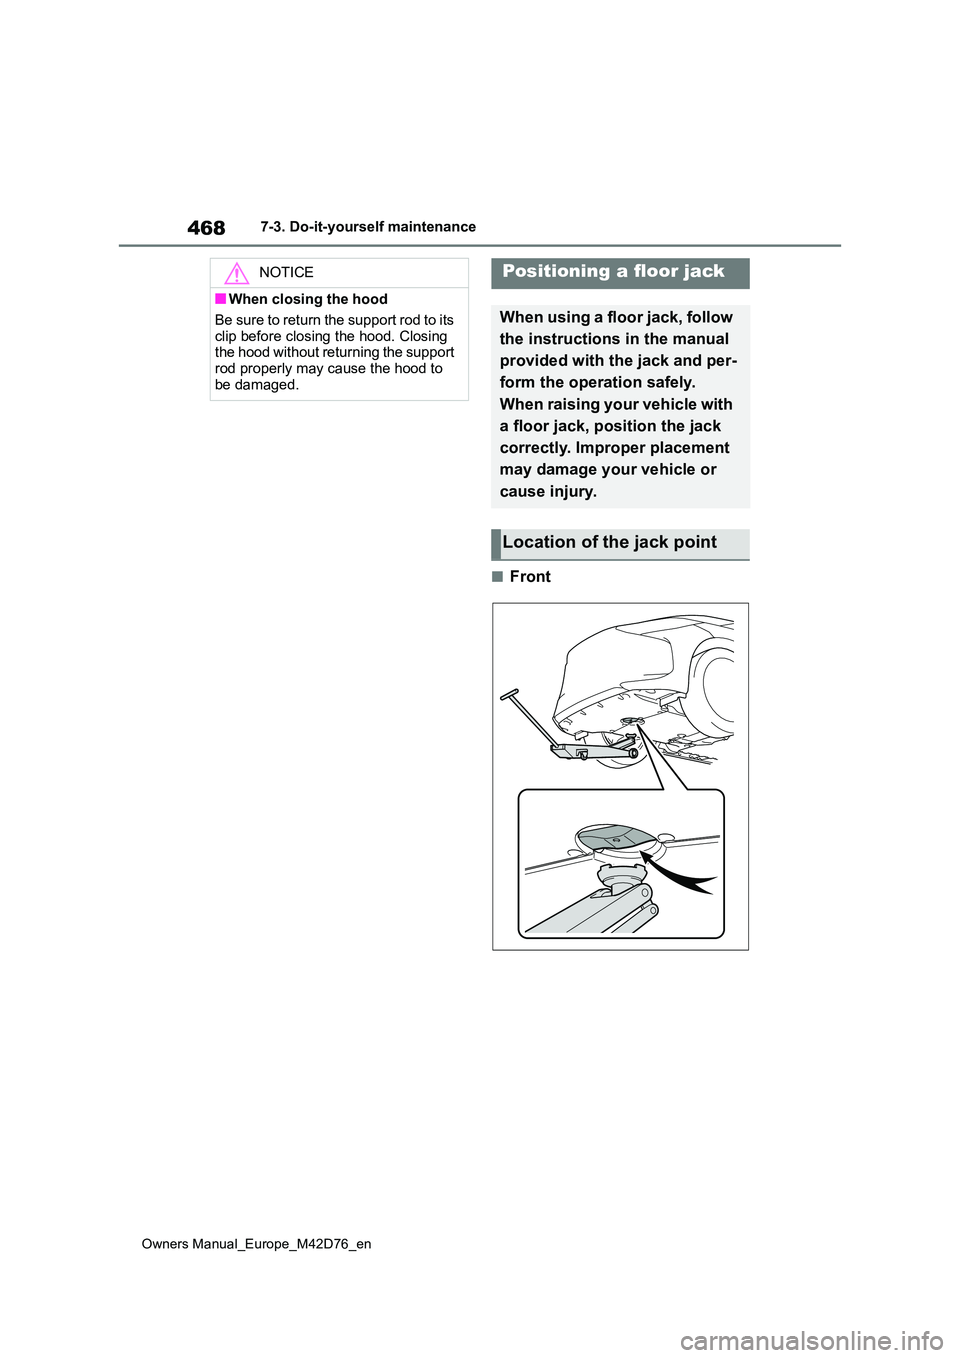 TOYOTA BZ4X 2022  Owners Manual (in English) 468
Owners Manual_Europe_M42D76_en
7-3. Do-it-yourself maintenance
■Front
NOTICE
■When closing the hood 
Be sure to return the support rod to its  
clip before closing the hood. Closing  the hood 